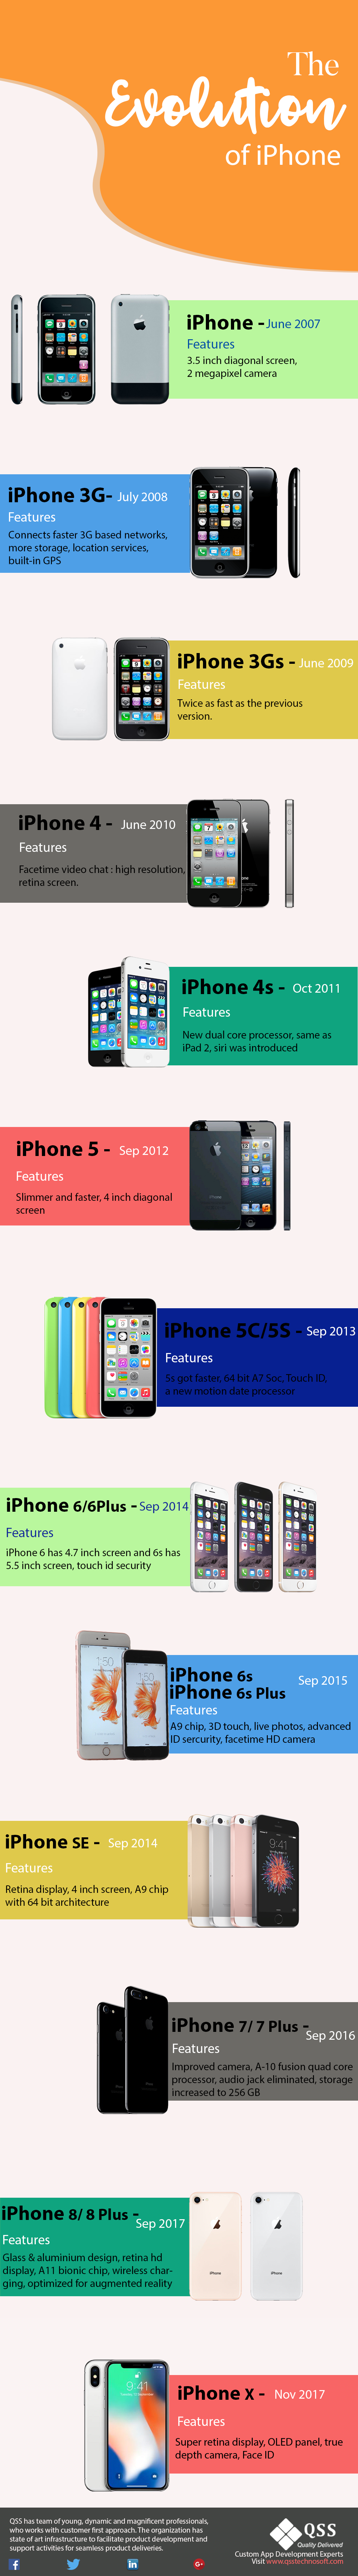 The evolution of Apple's iPhone